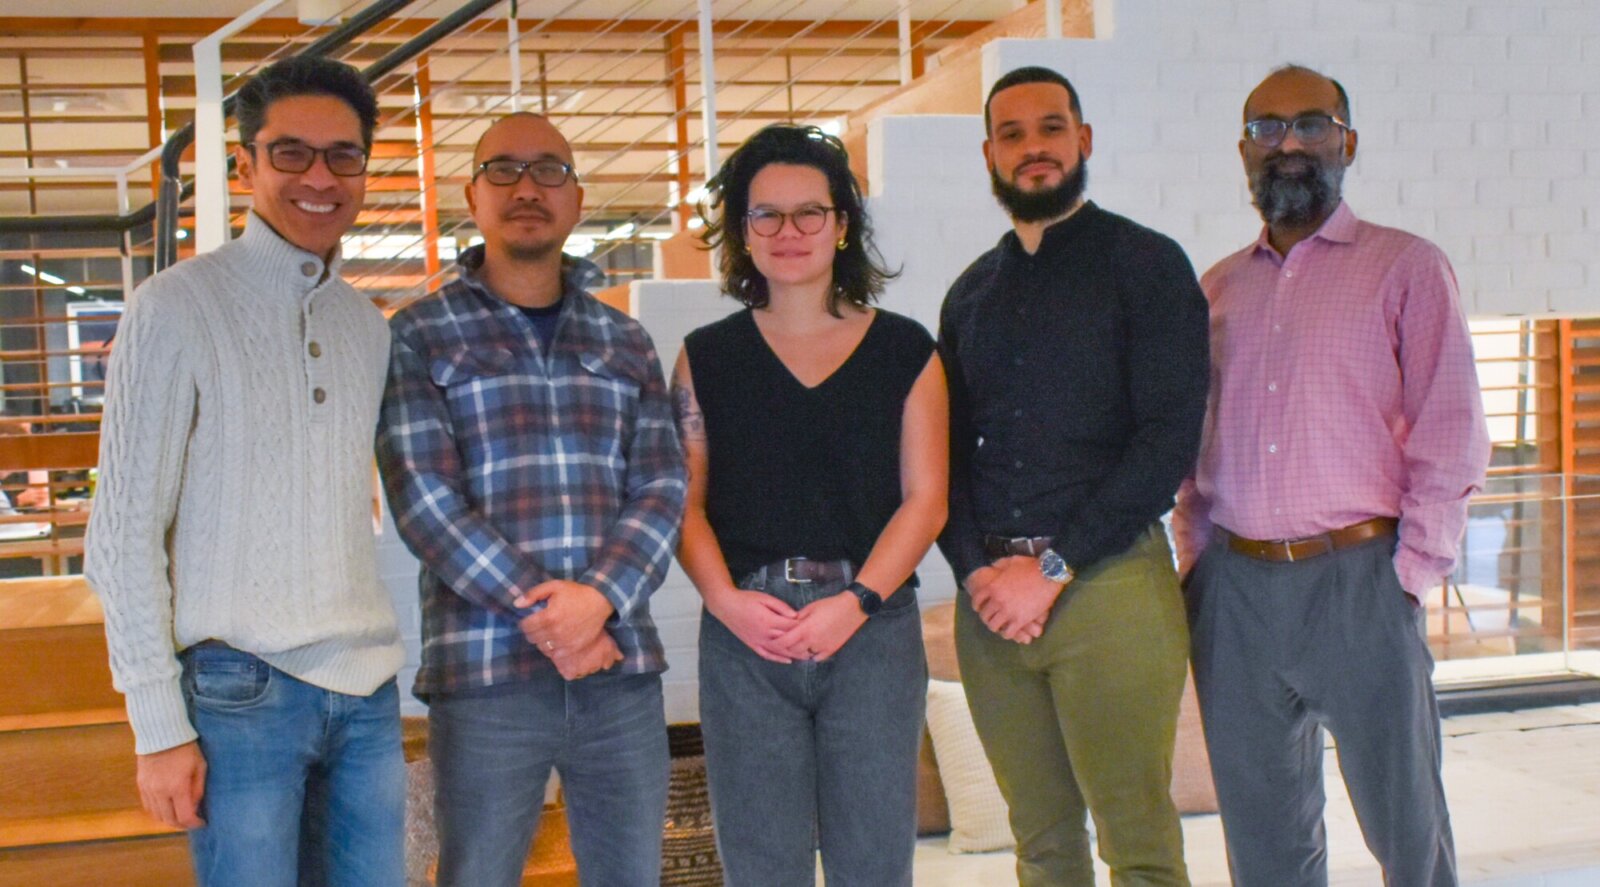 From left to right is CEO George Guerrero, Co-founder Alex Saingchin, COO Mika Weinstein, with members of the Gilmore Khandar Law Firm Trey McKinney and Parag Khandar. They are standing in an office near a set of stairs smiling at the camera.